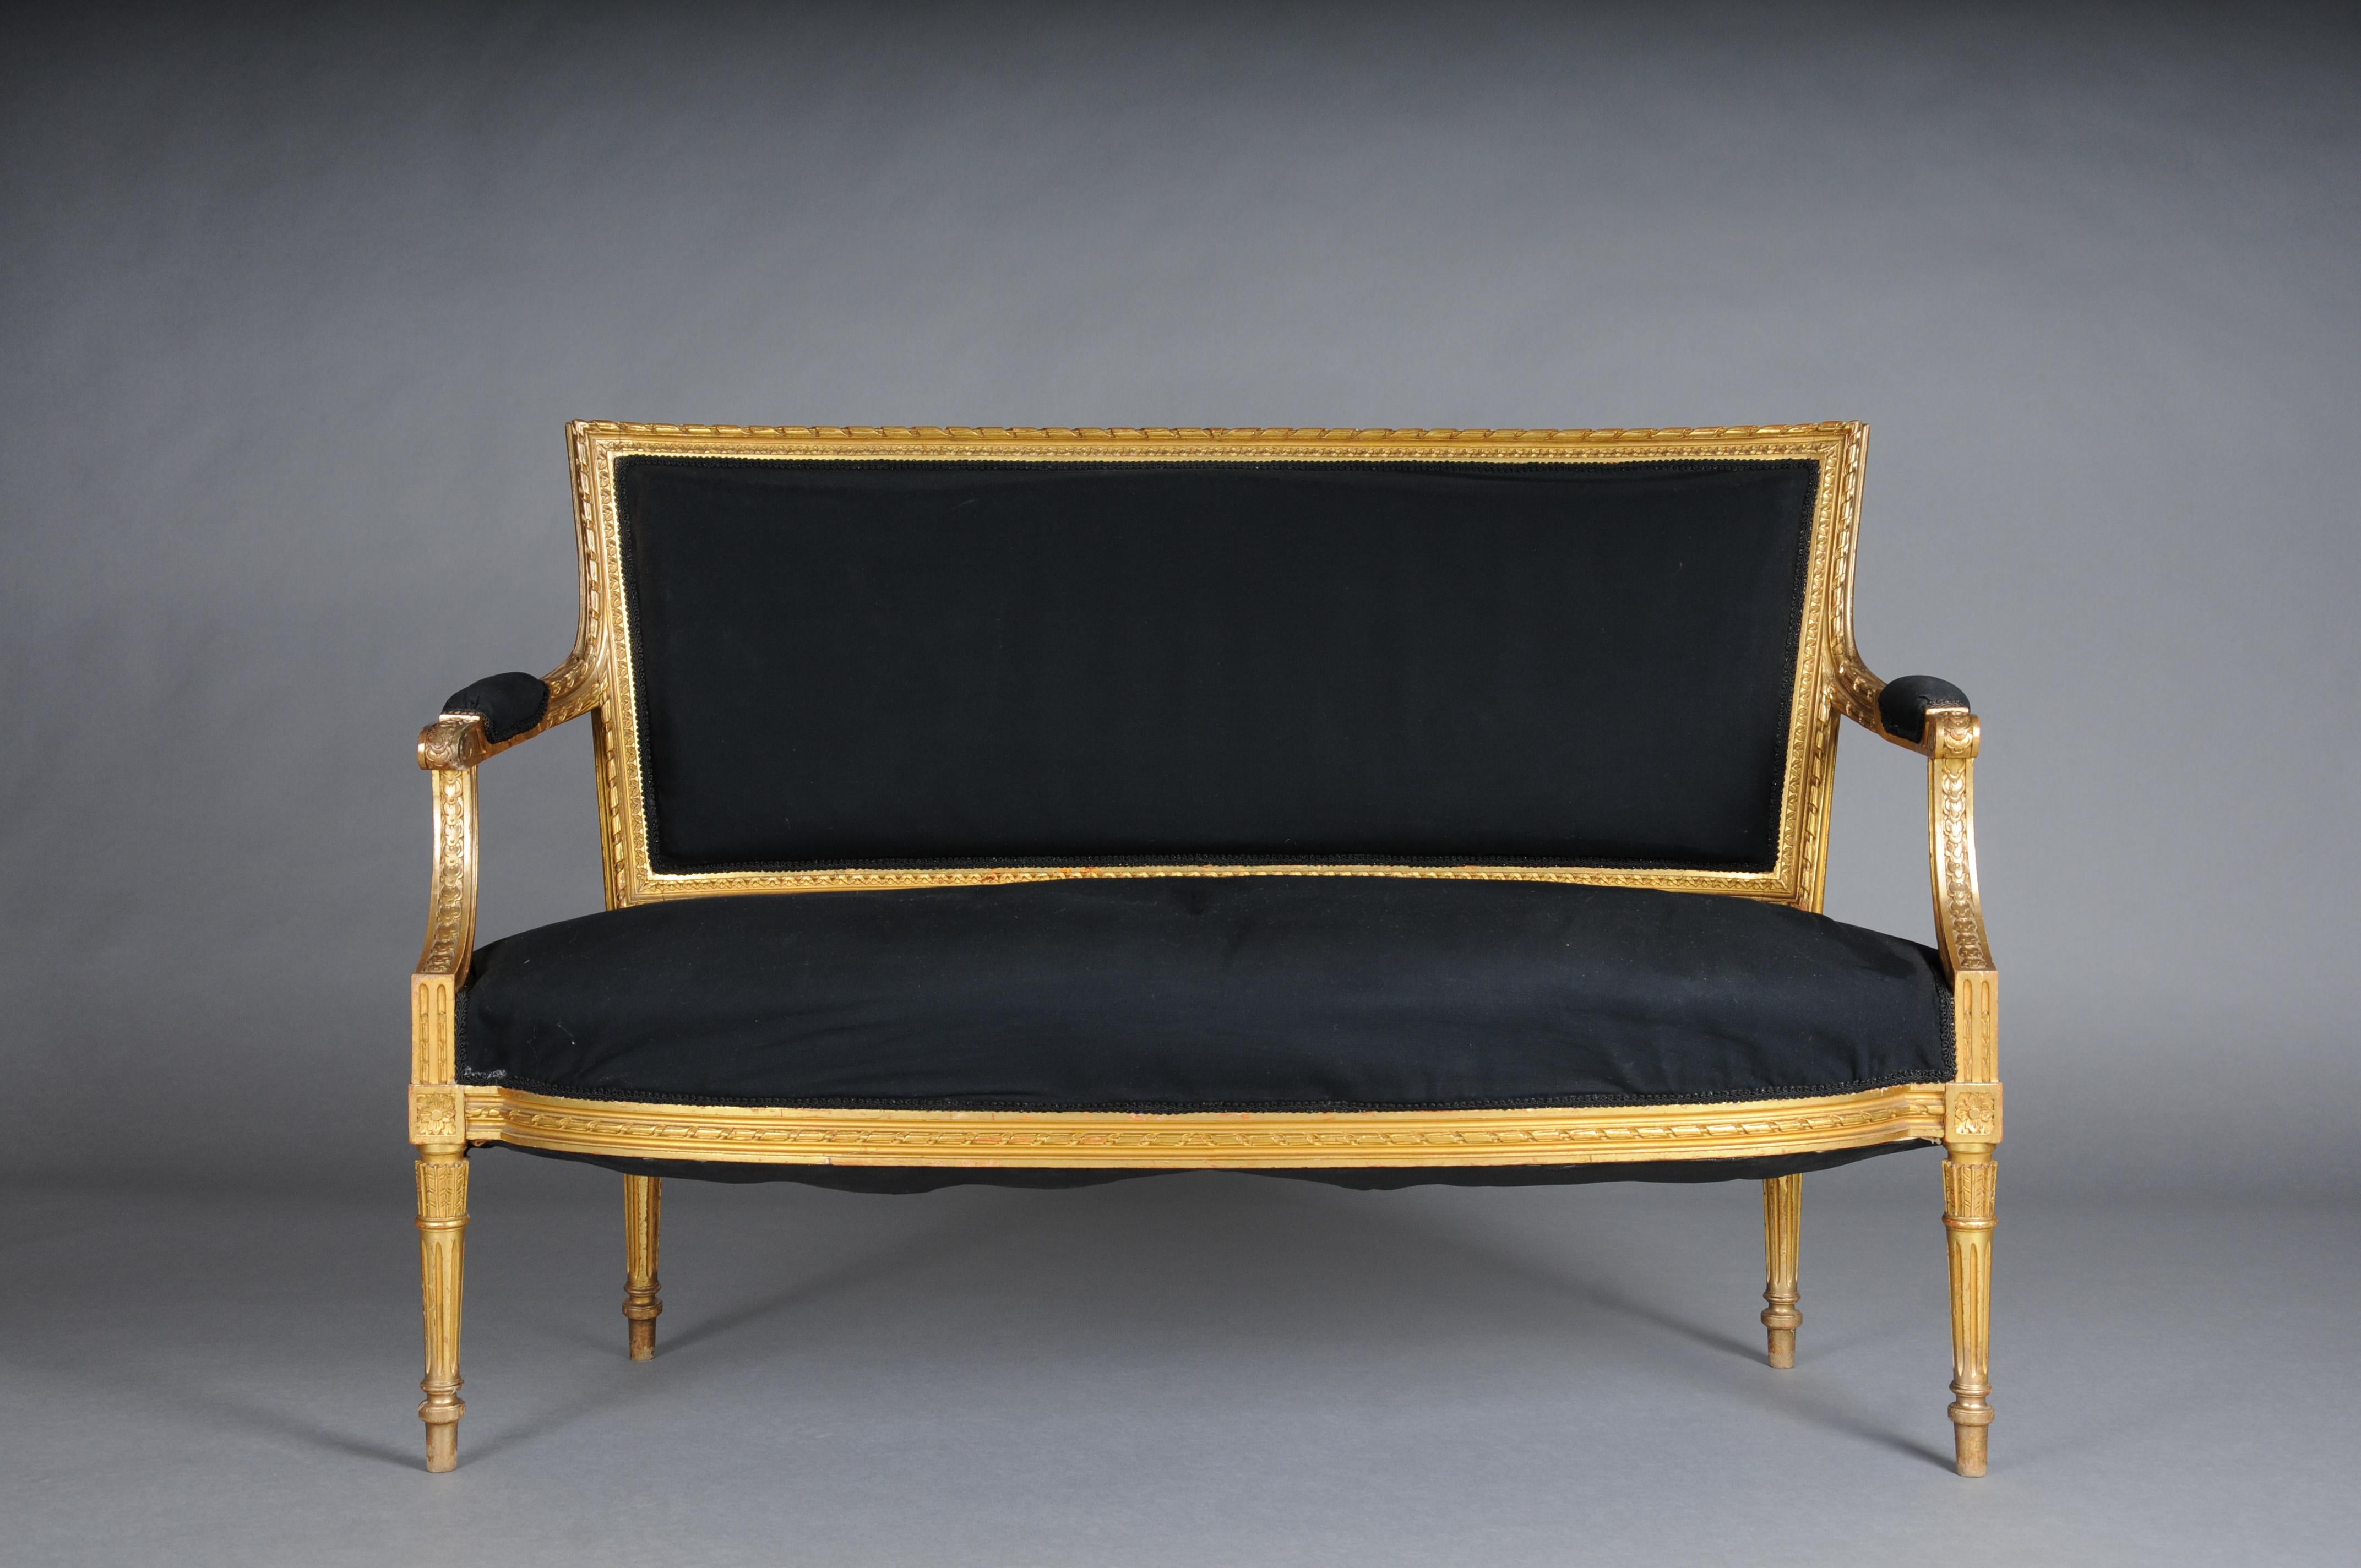 Antique French salon canape/sofa Louis XVI, gold

Solid wood, finely carved and gilded. Channeled and grooved legs. Seat and backrest as well as armrests are padded and covered with black fabric.

France 19th century